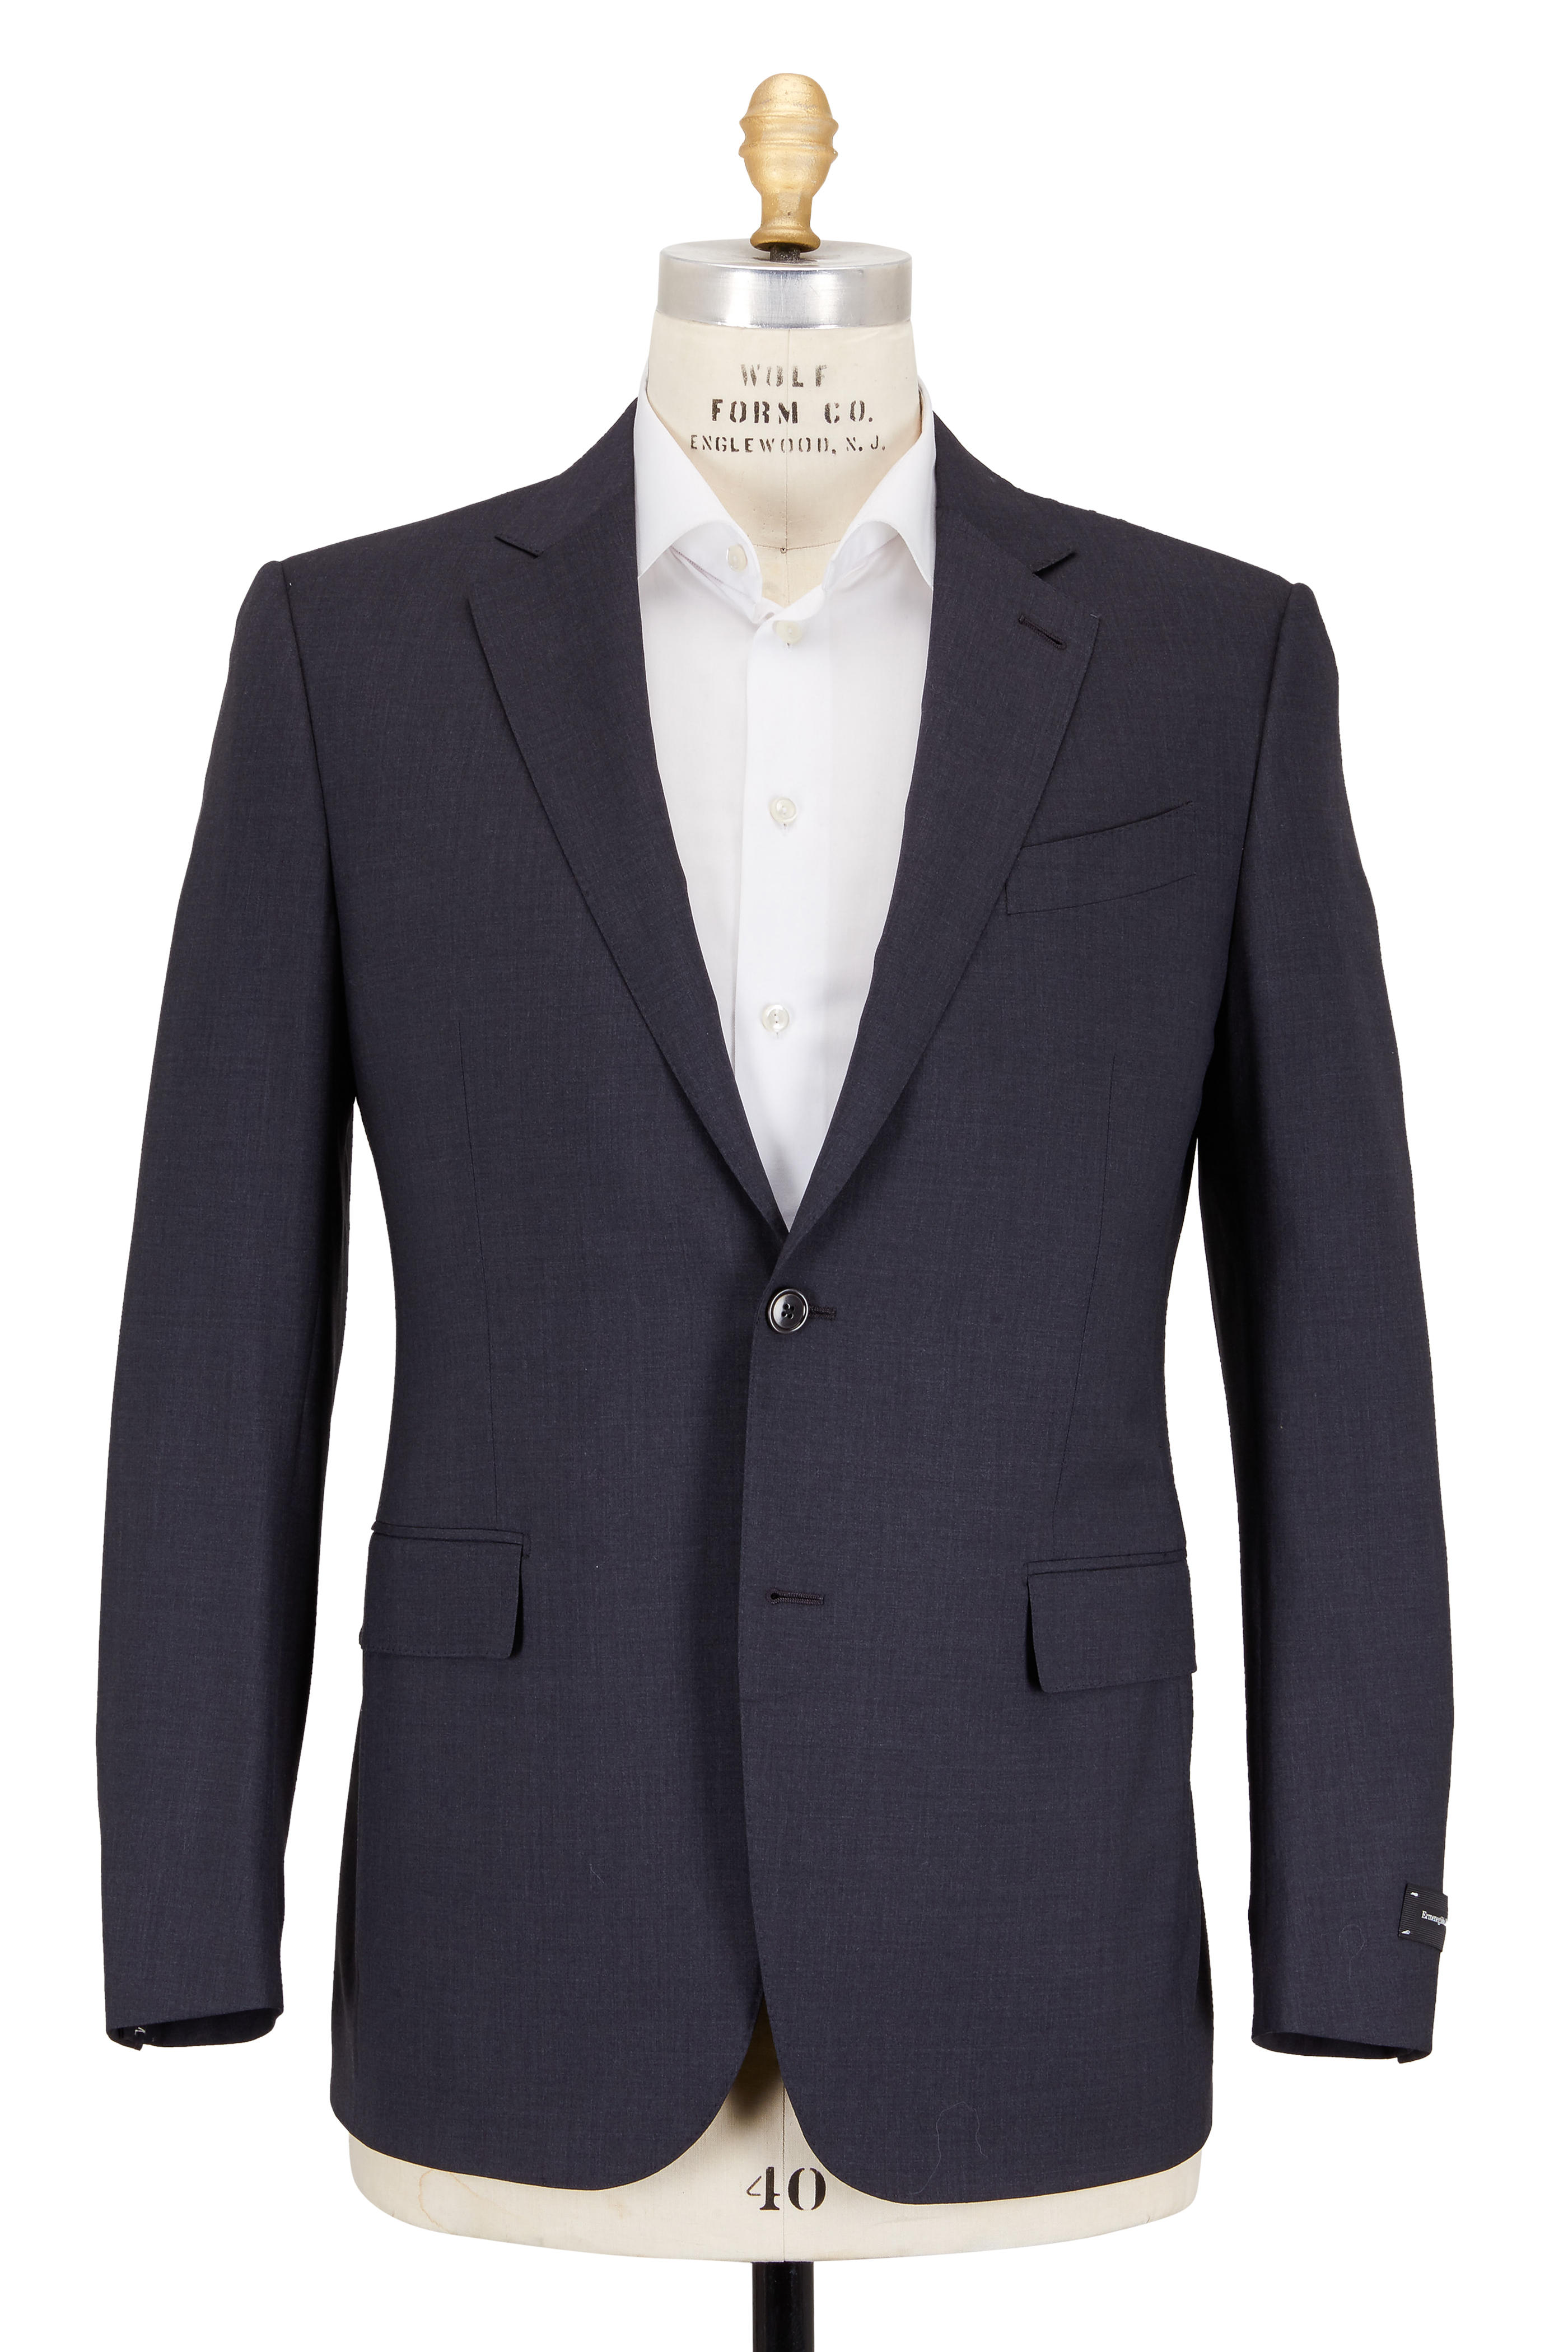 Zegna - Solid Dark Gray High Performance Wool Suit